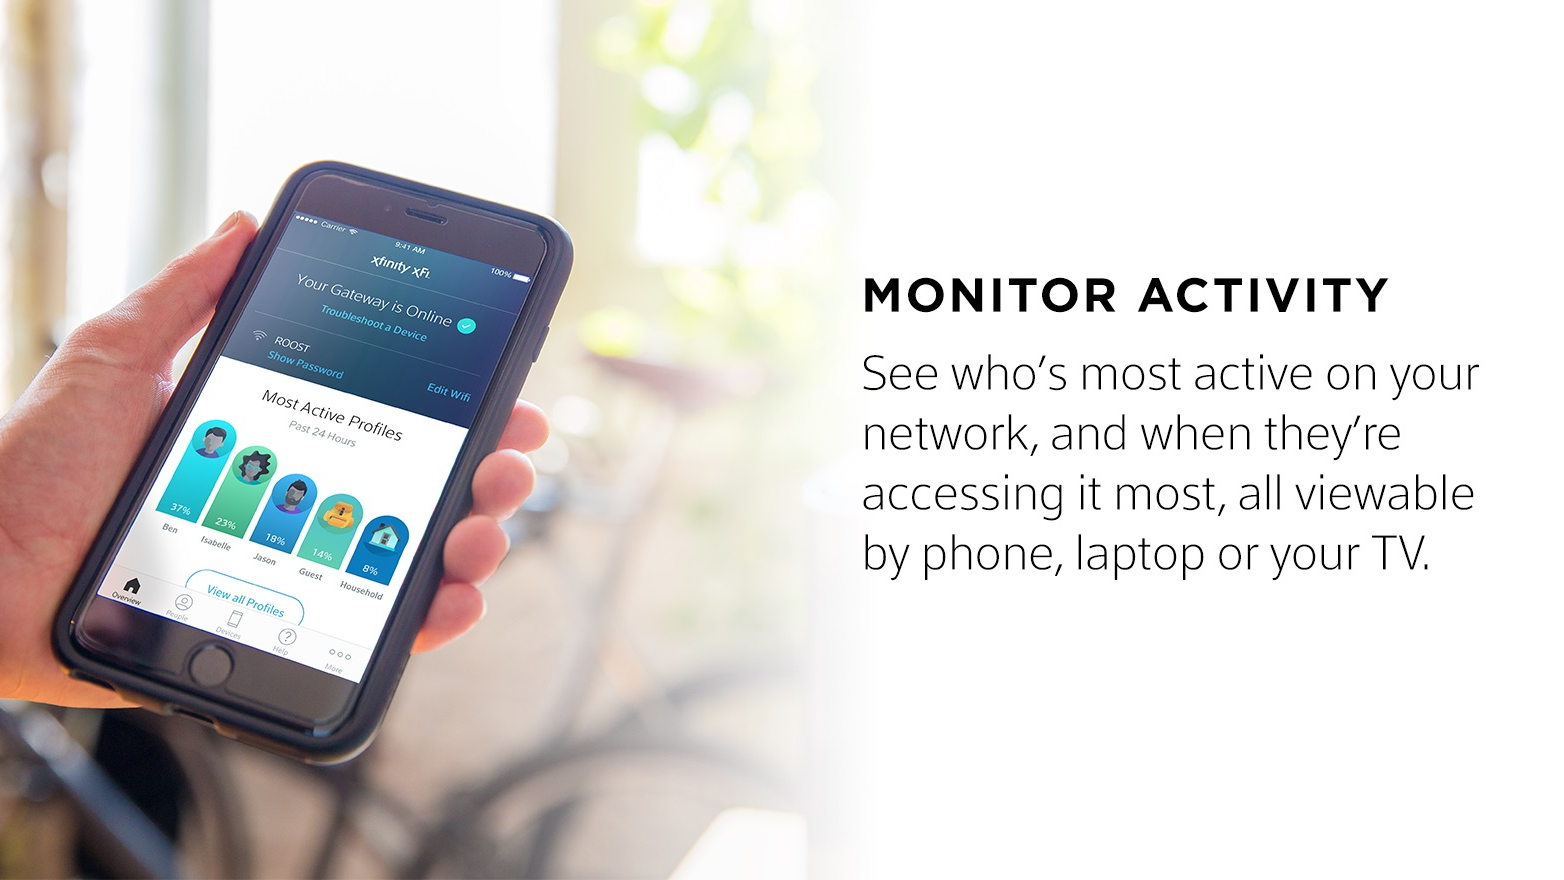 The Xfinity xFi activity monitor displayed on a smartphone.